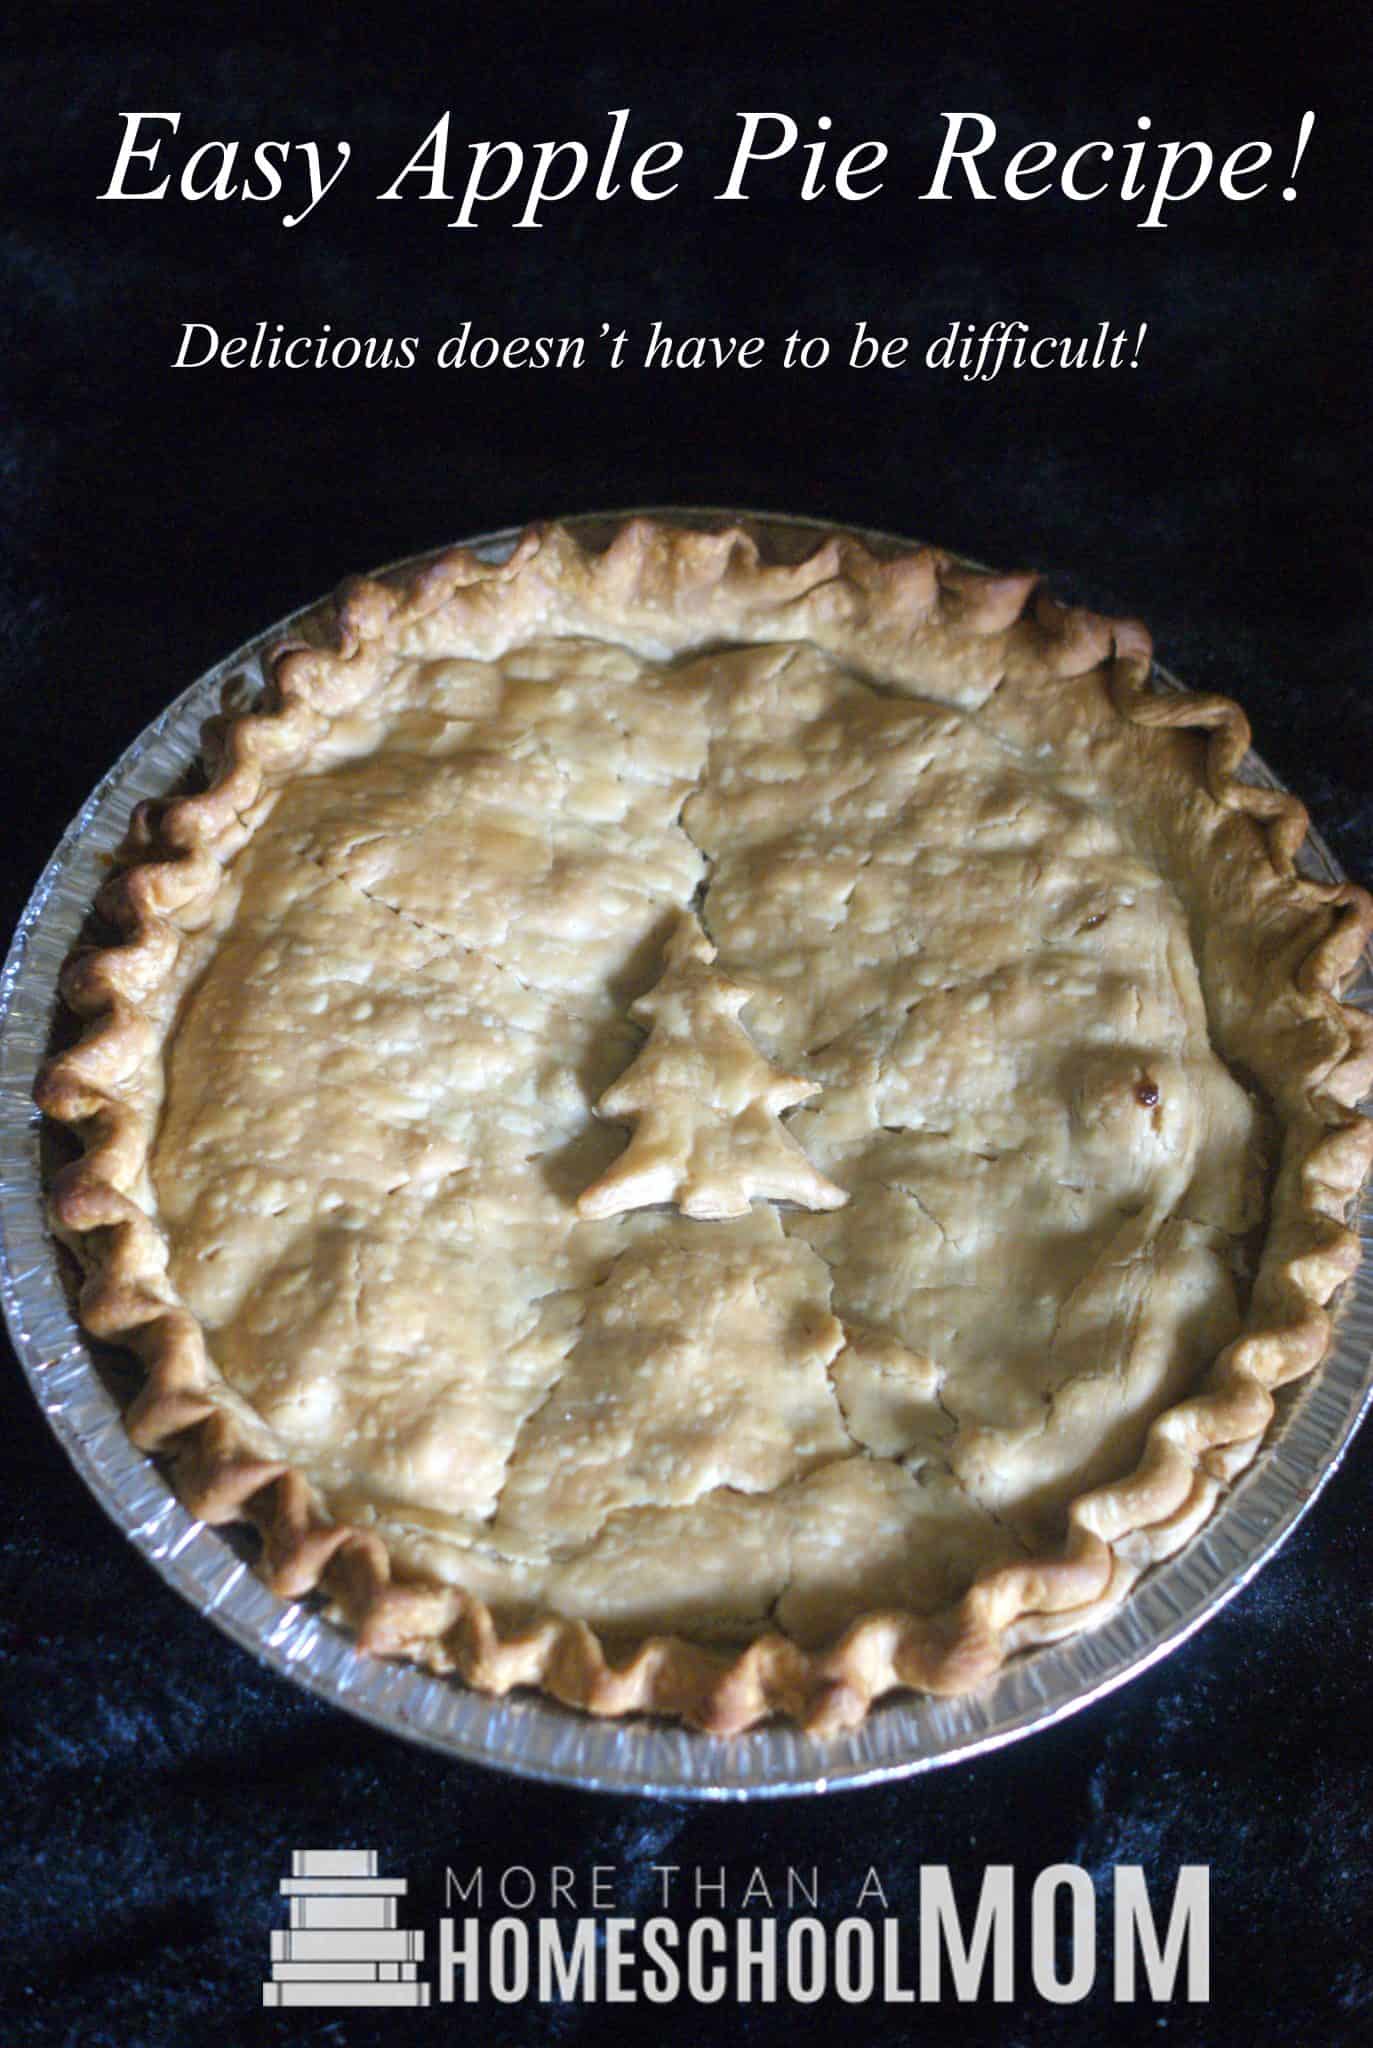 Easy Apple Pie Recipe - Easy home made apple pie recipe with a Doctor Who apple pie with weeping angels. 